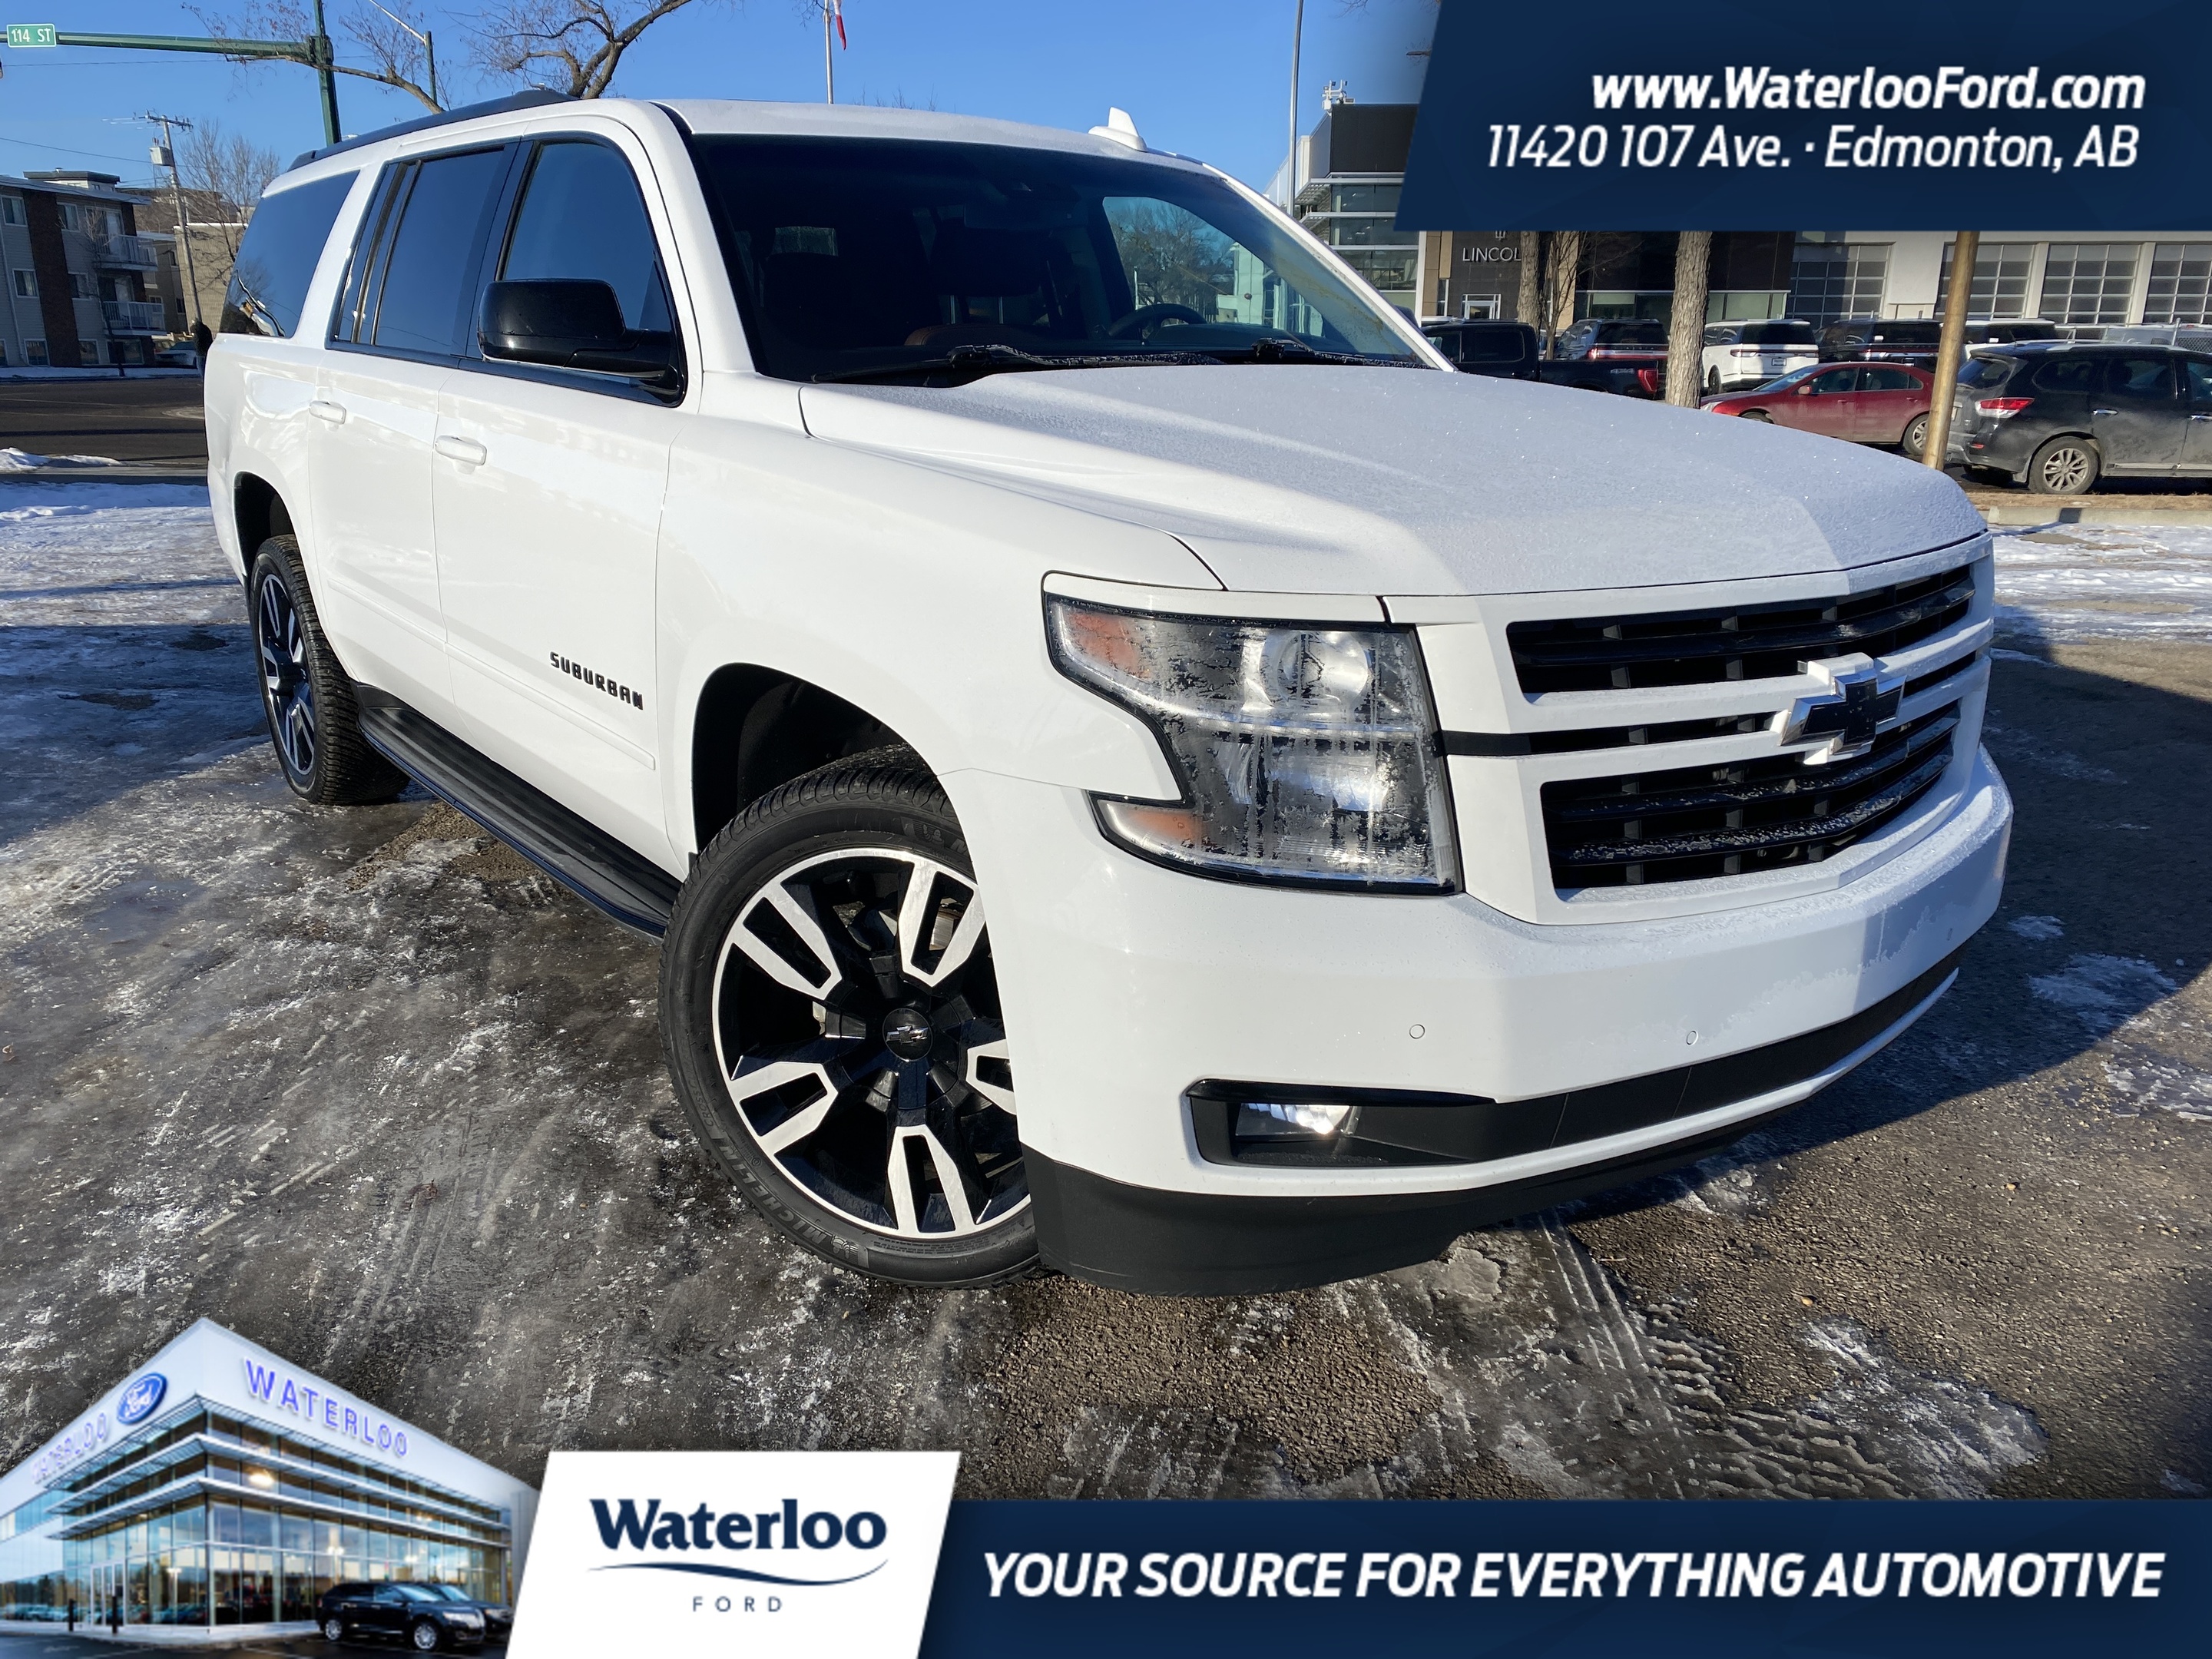 2019 Chevrolet Suburban Premier | Remote Start | Heated/Cooled Seats 